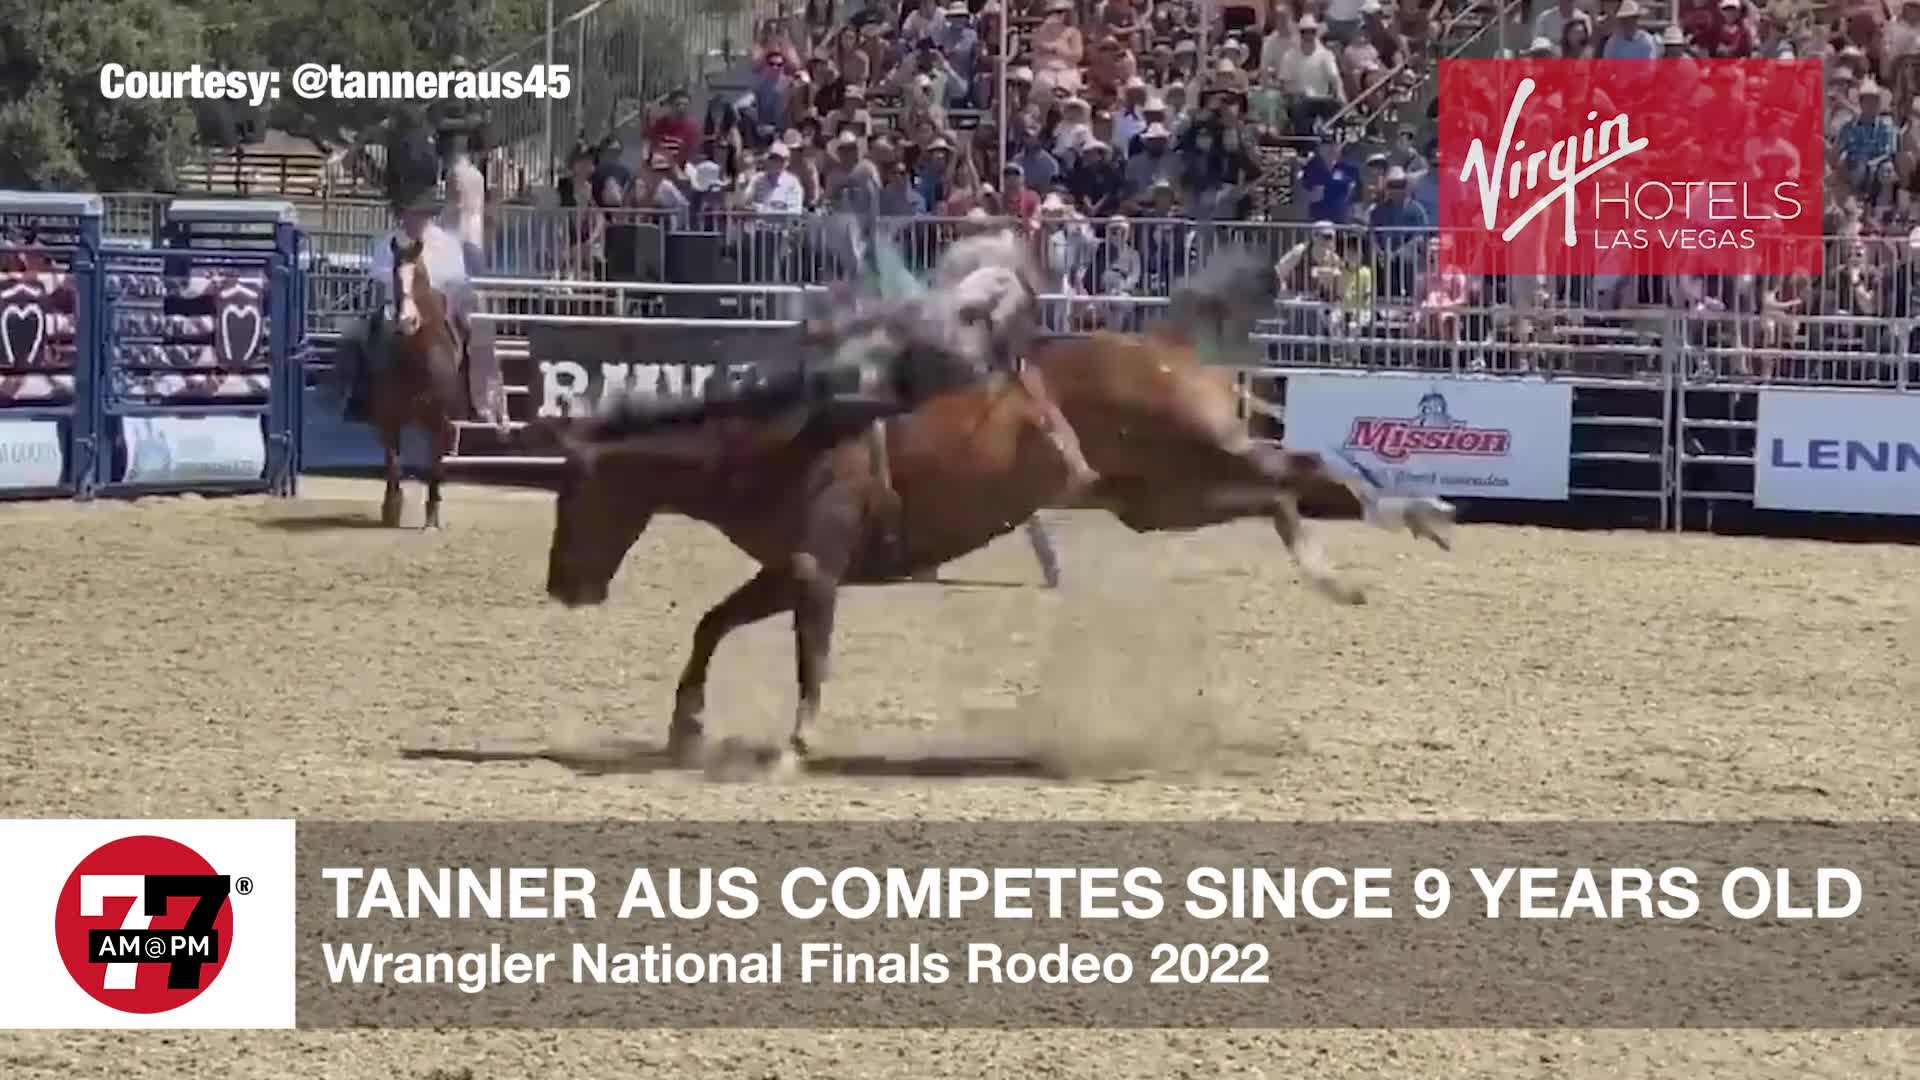 Tanner Aus competes since 9 years old